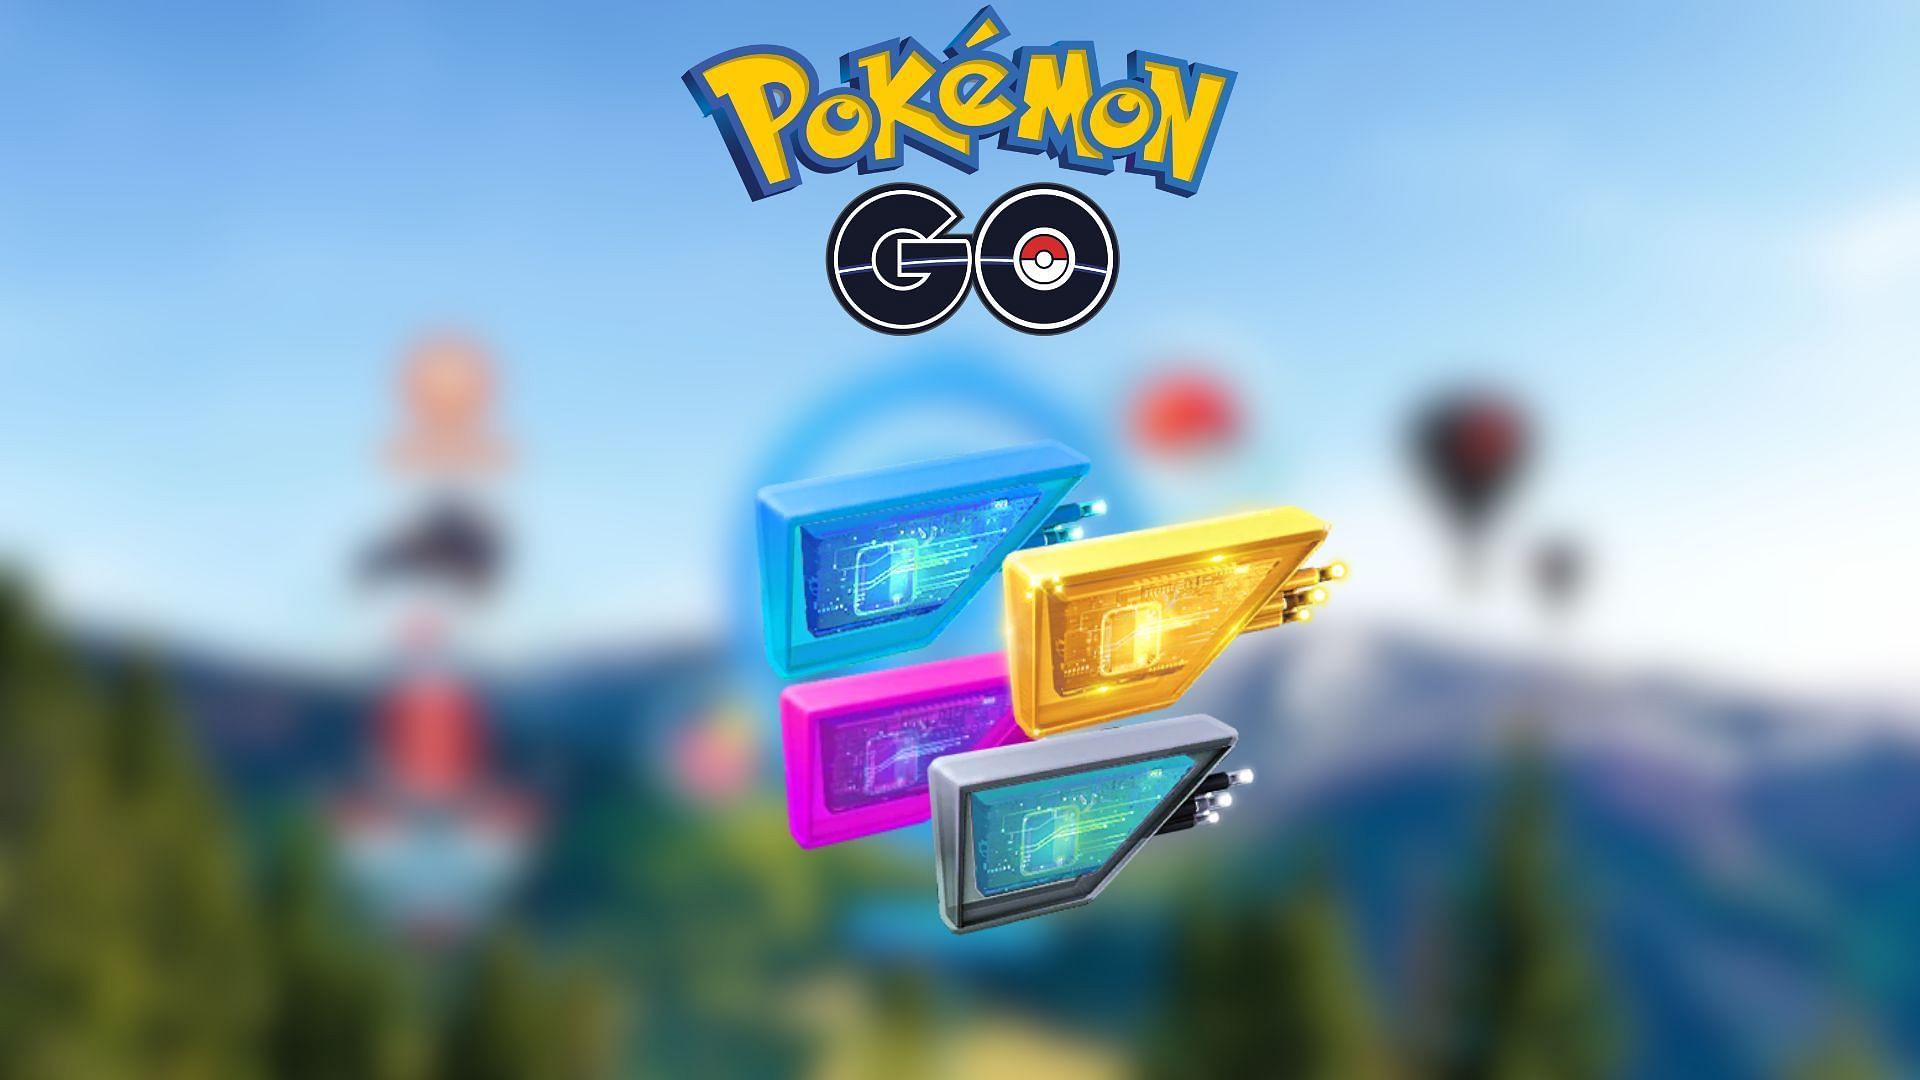 Lure Modules as they appear in the game (Image via Niantic/Serebii)